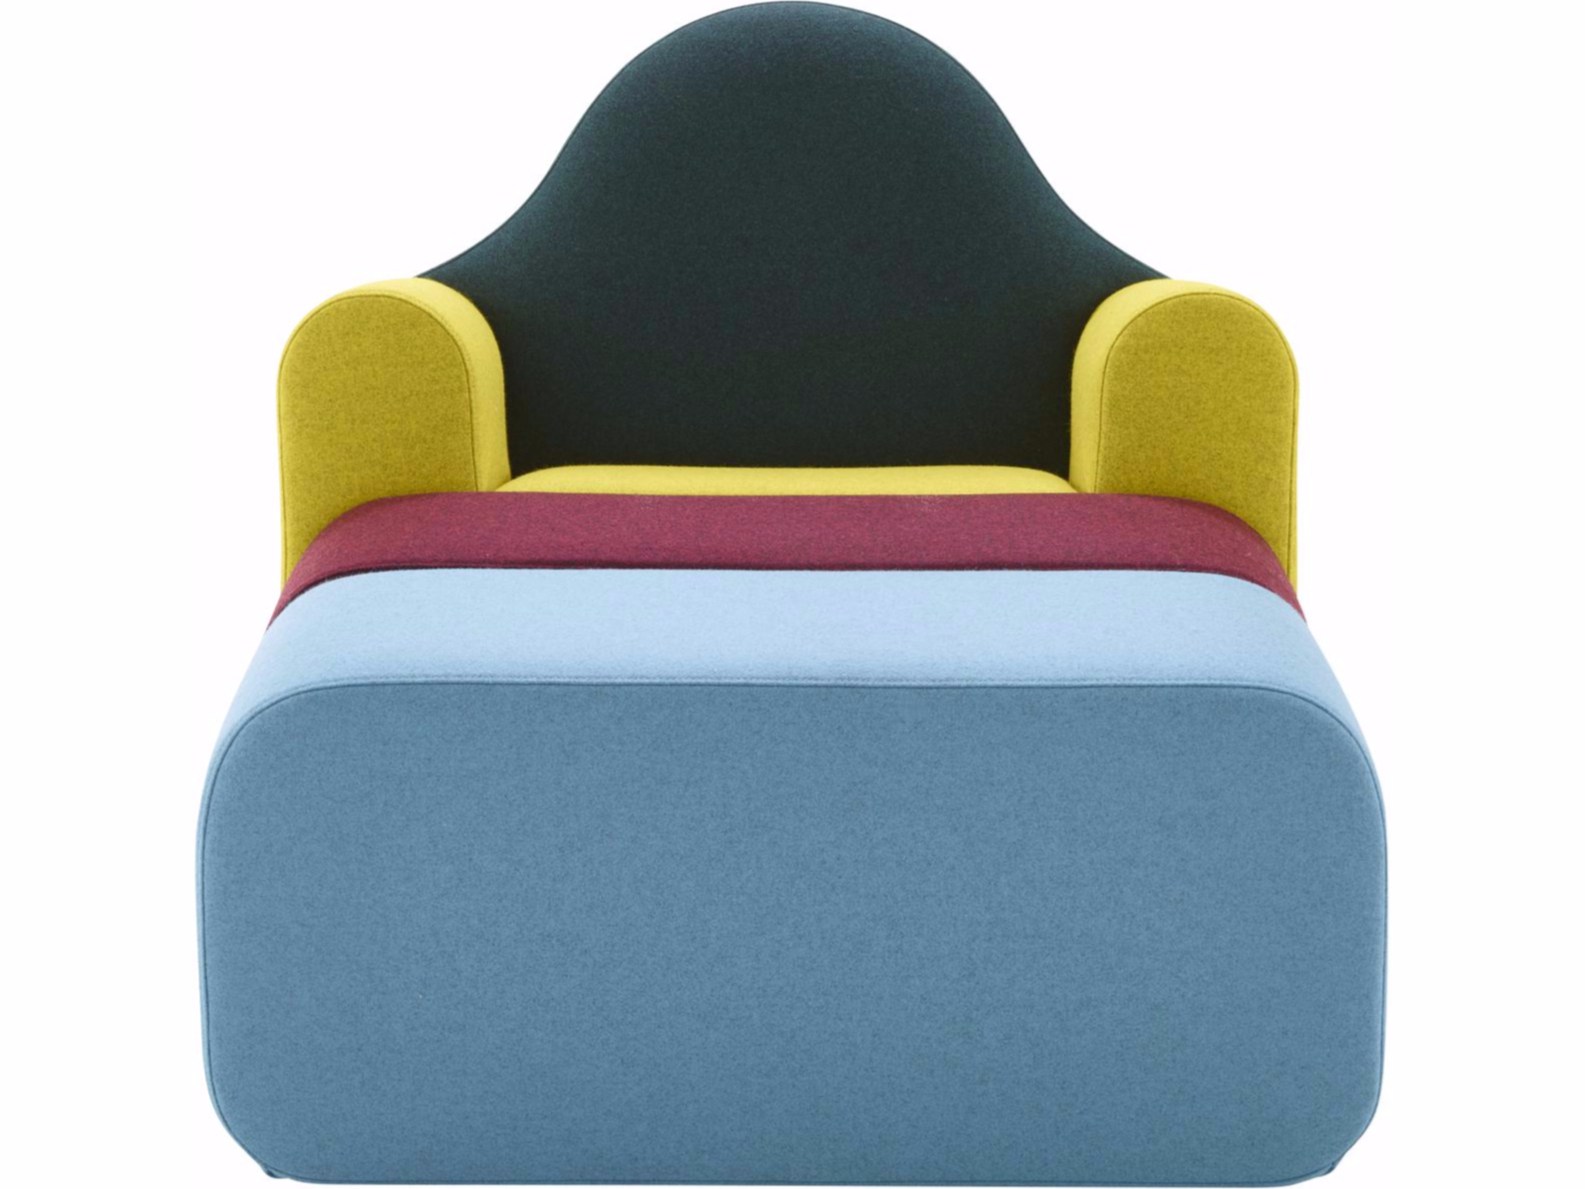 SLICE Sectional Armchair by Pierre Charpin for Ligne Roset